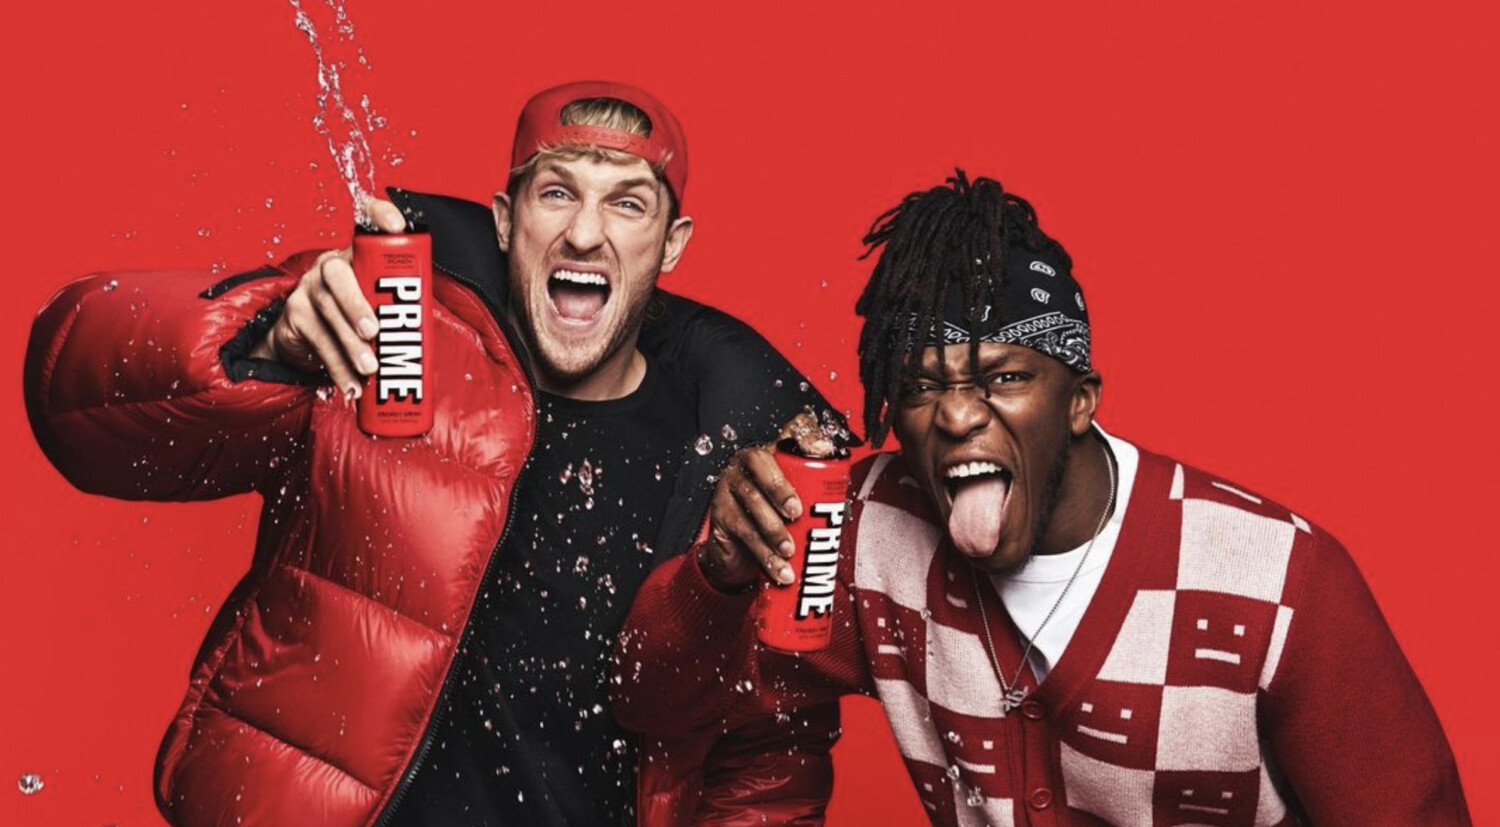 Prime: a r expert explains how Logan Paul and KSI's drink became so  popular